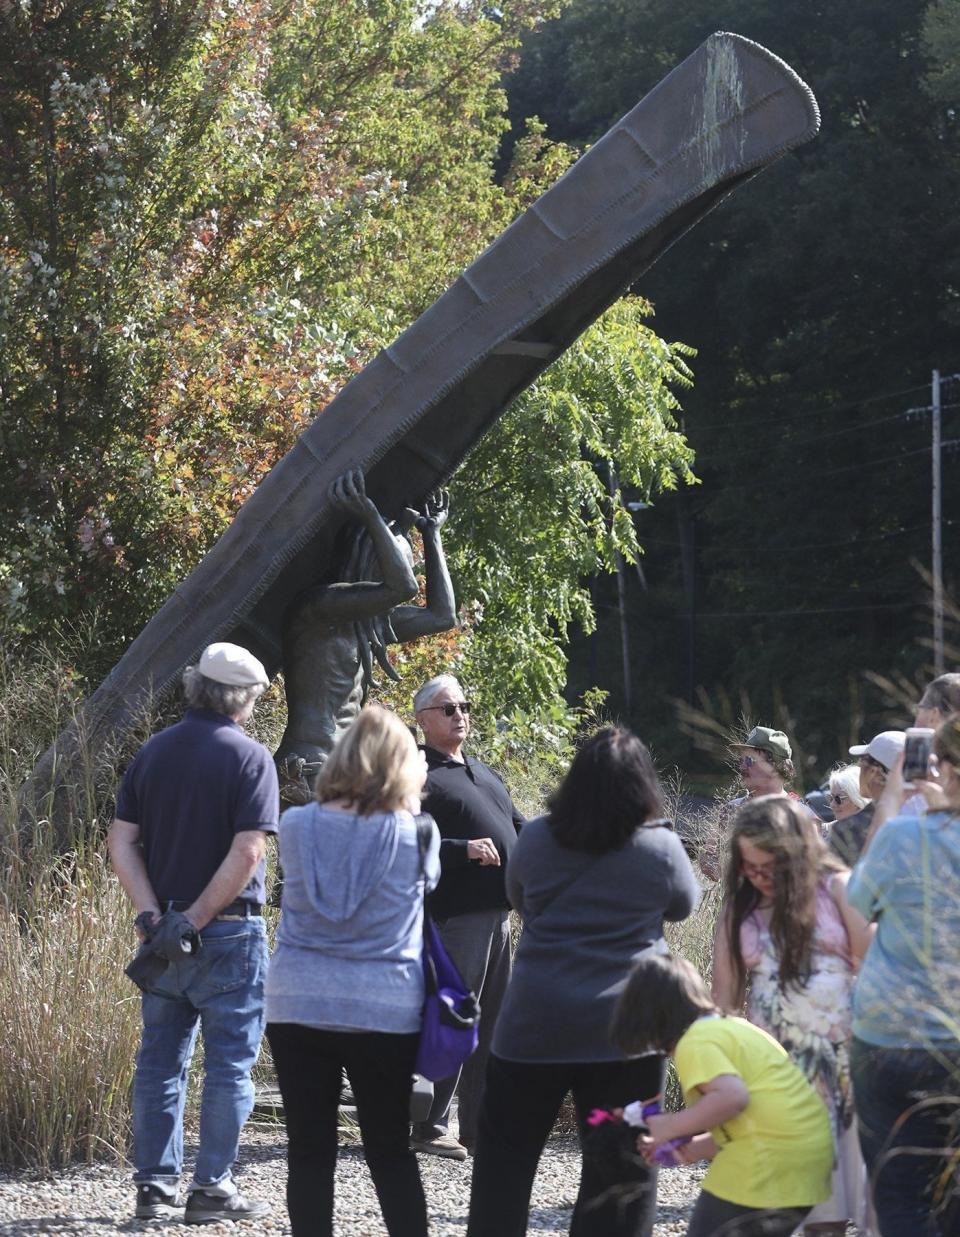 Artist Peter B. Jones talks about his statue "The Portage" at North Portage Path and Merriman Road during the 2019 North American First People's Day Commemoration in October 2019 in Akron